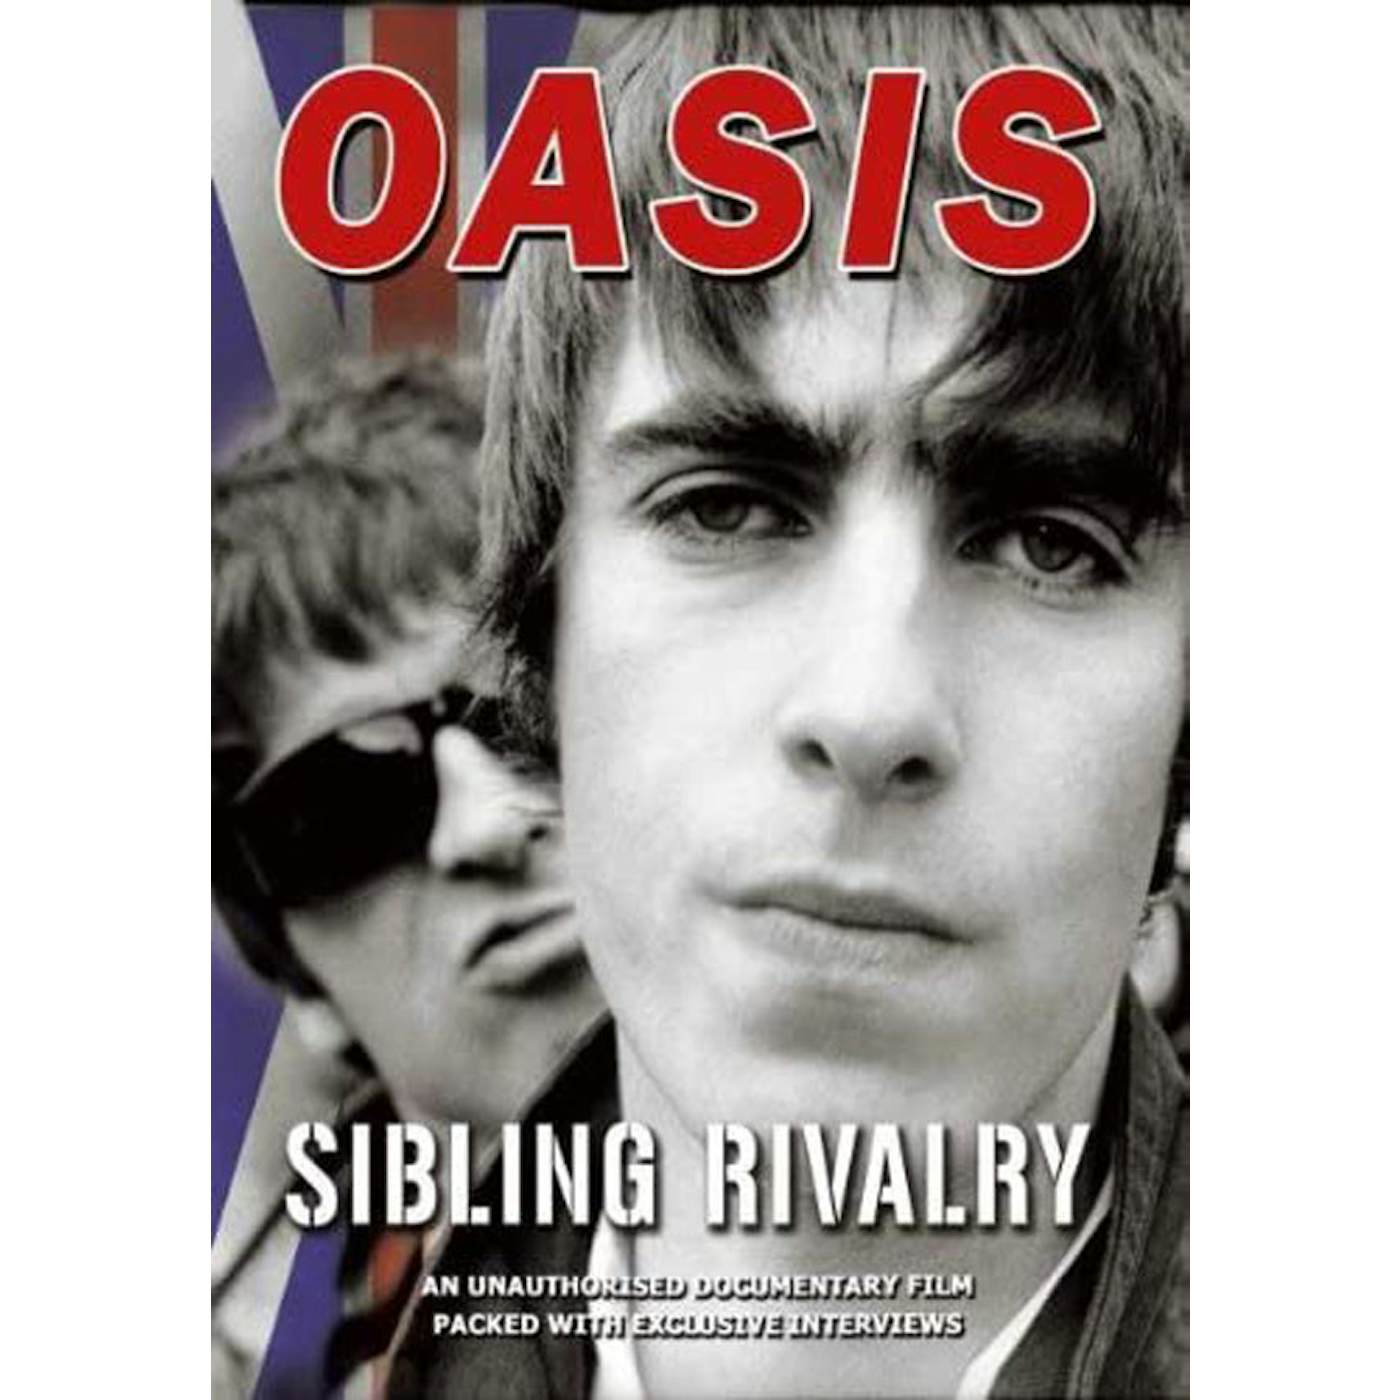 Oasis DVD - Oasis-Sibling Rivalry